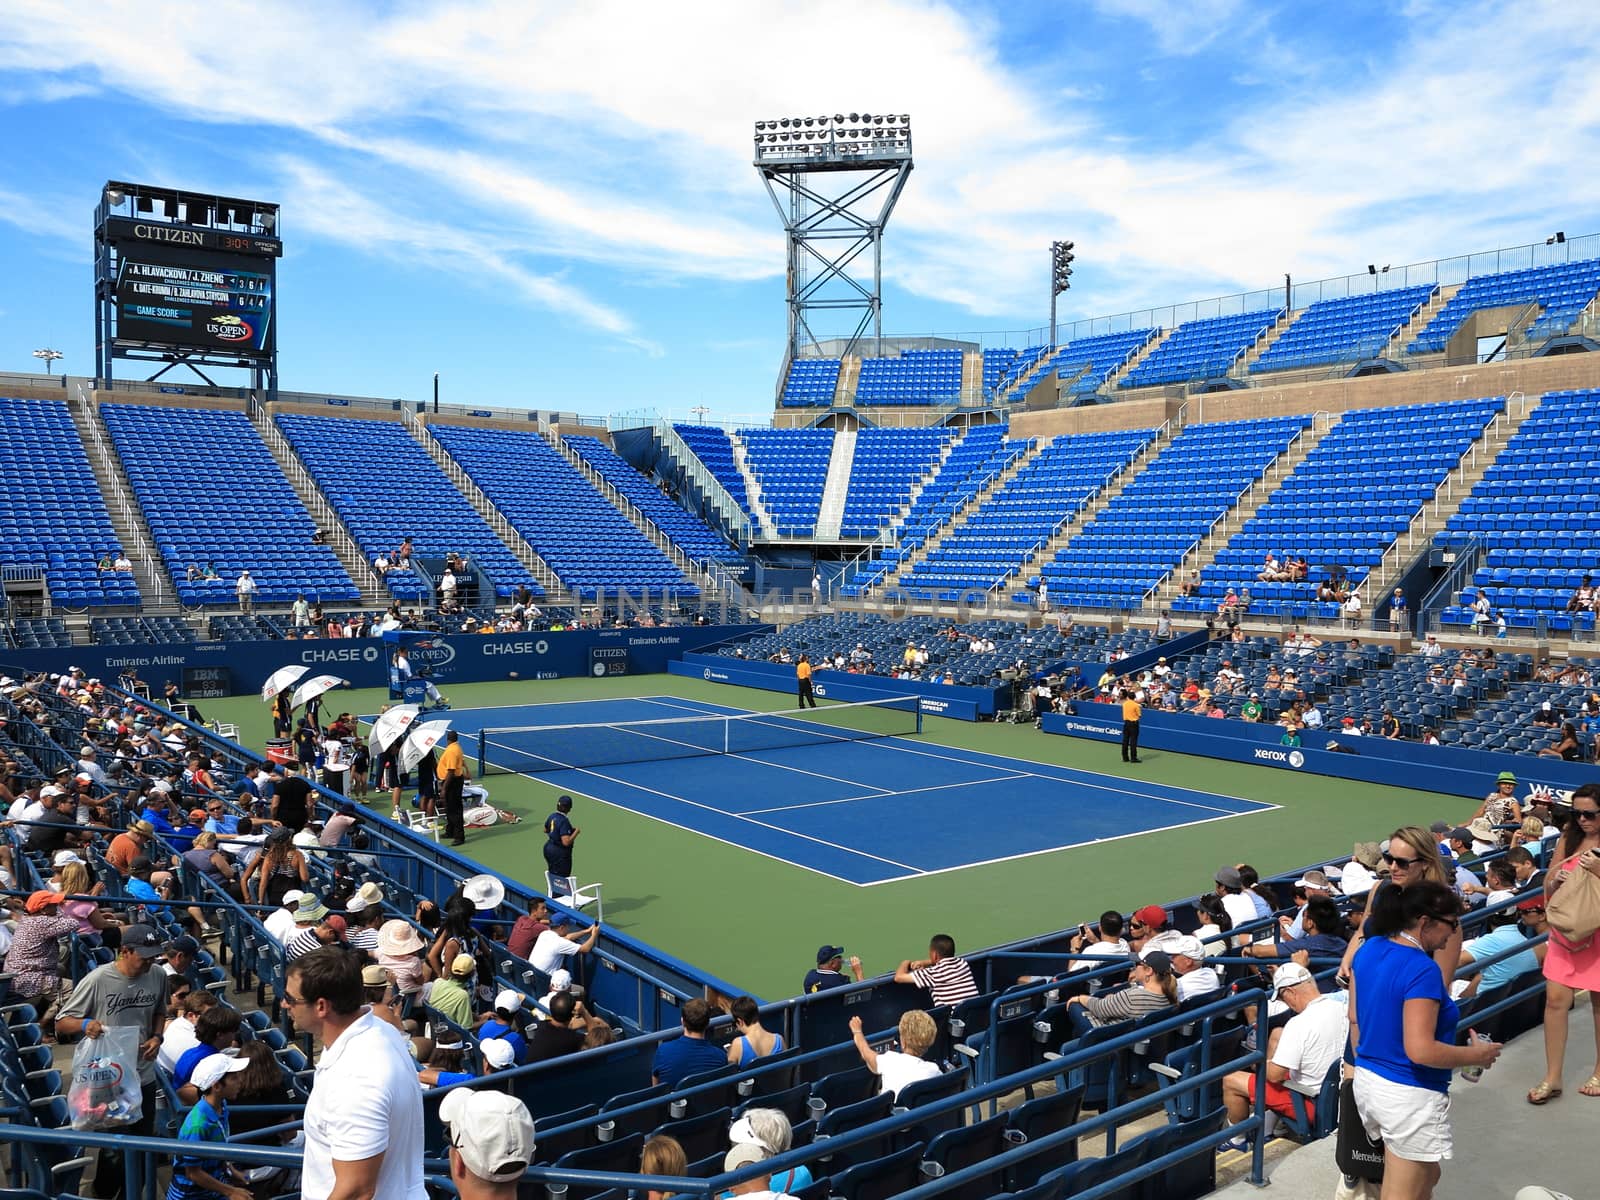 Louis Armstrong Stadium, the original US Open venue at the Billie Jean King Tennis Center.